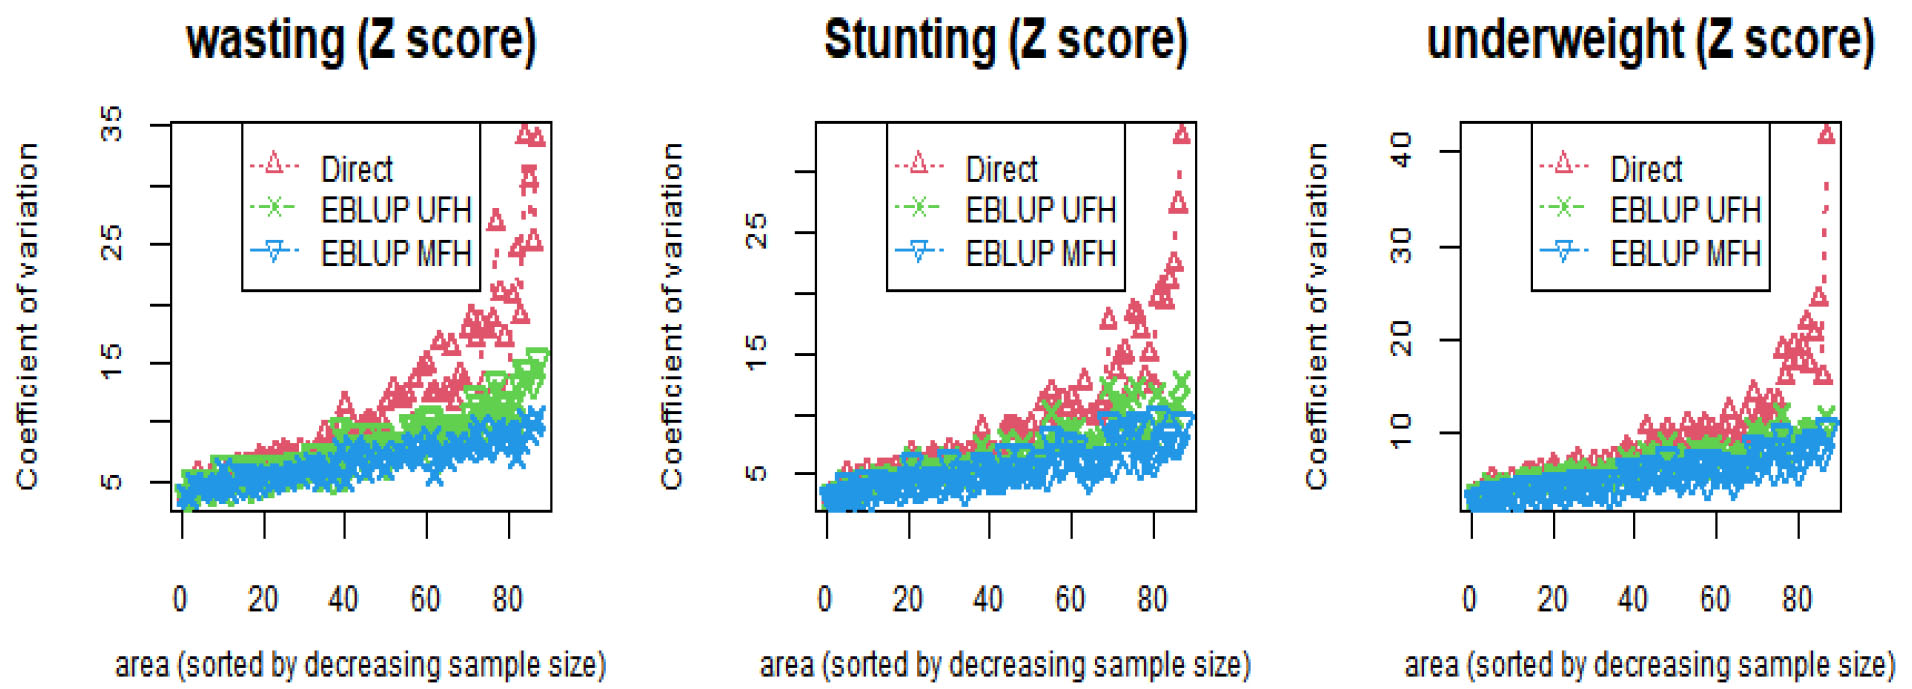 Zones (sorted by decreasing sample size) CV (%) of direct, EBLUP UFH and EBLUP MFH estimators of stunting, wasting and underweight for children under age five.